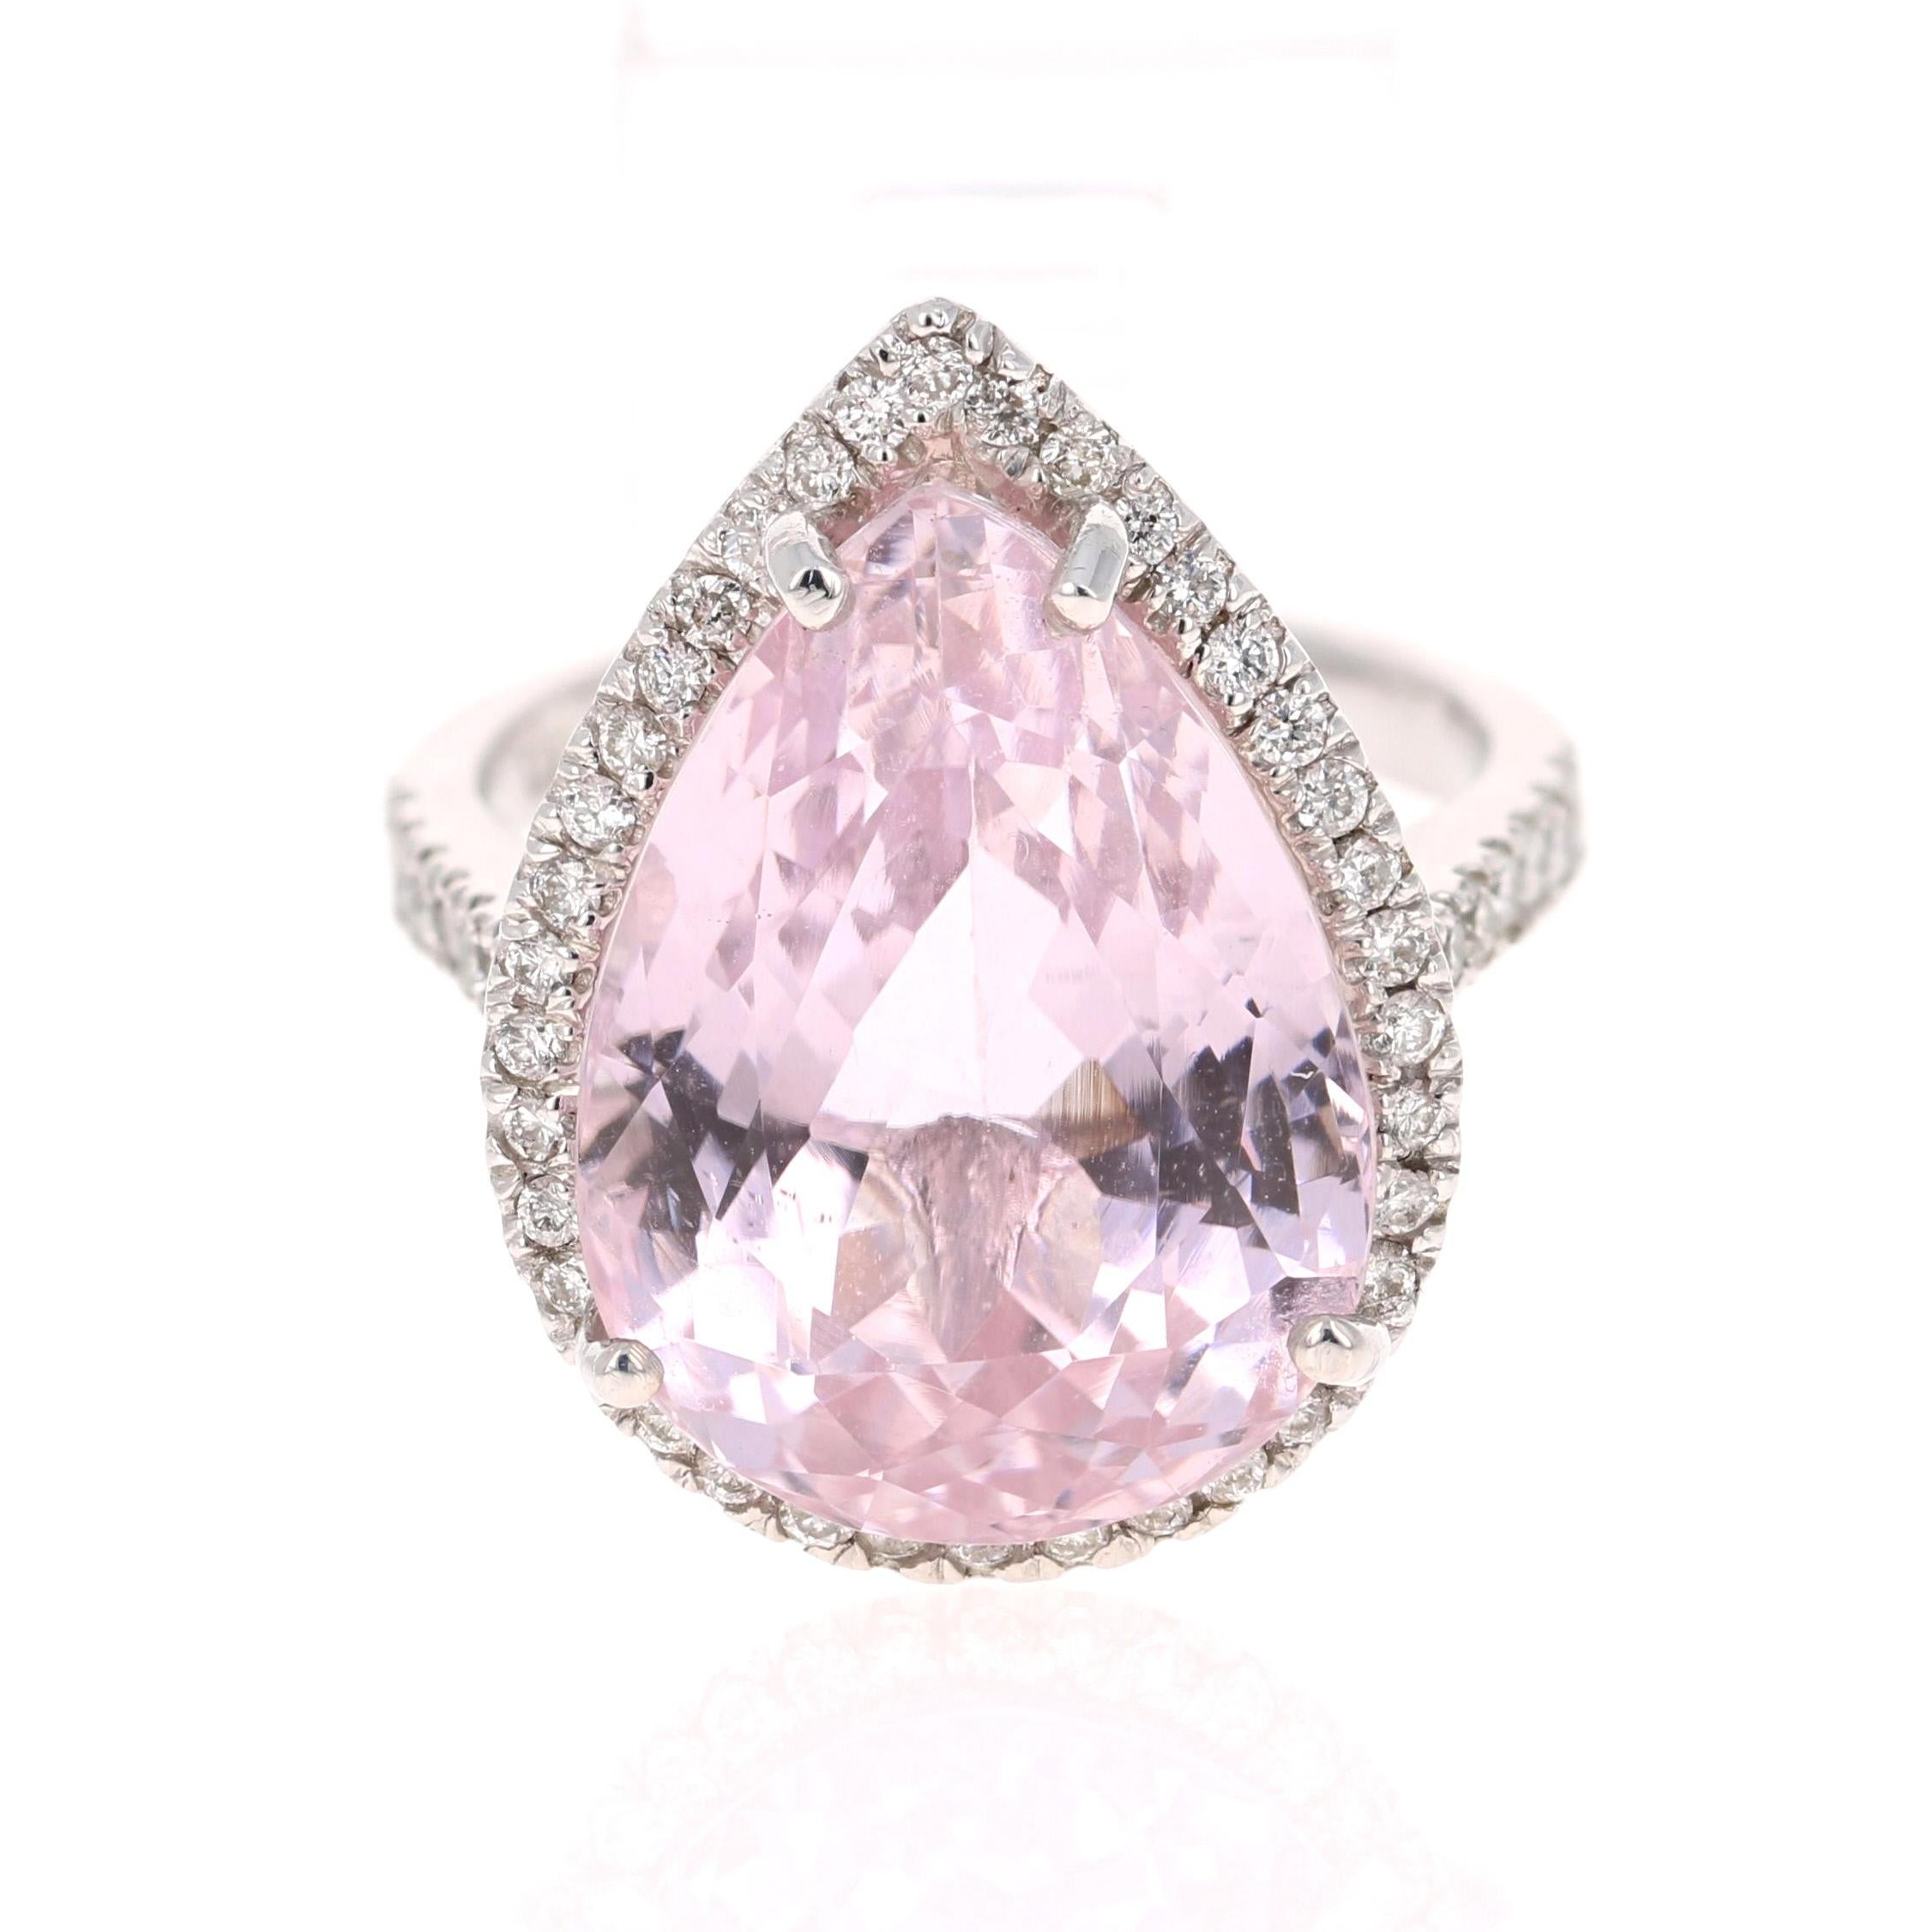 This beauty has a large Pear Cut 19.31 Carat Kunzite that is set in the center of the ring, and is surrounded by 54 Round Cut Diamonds that weighs 0.63 Carats.  The total carat weight of the ring is 19.94 Carats.

The ring is made in 14K White Gold